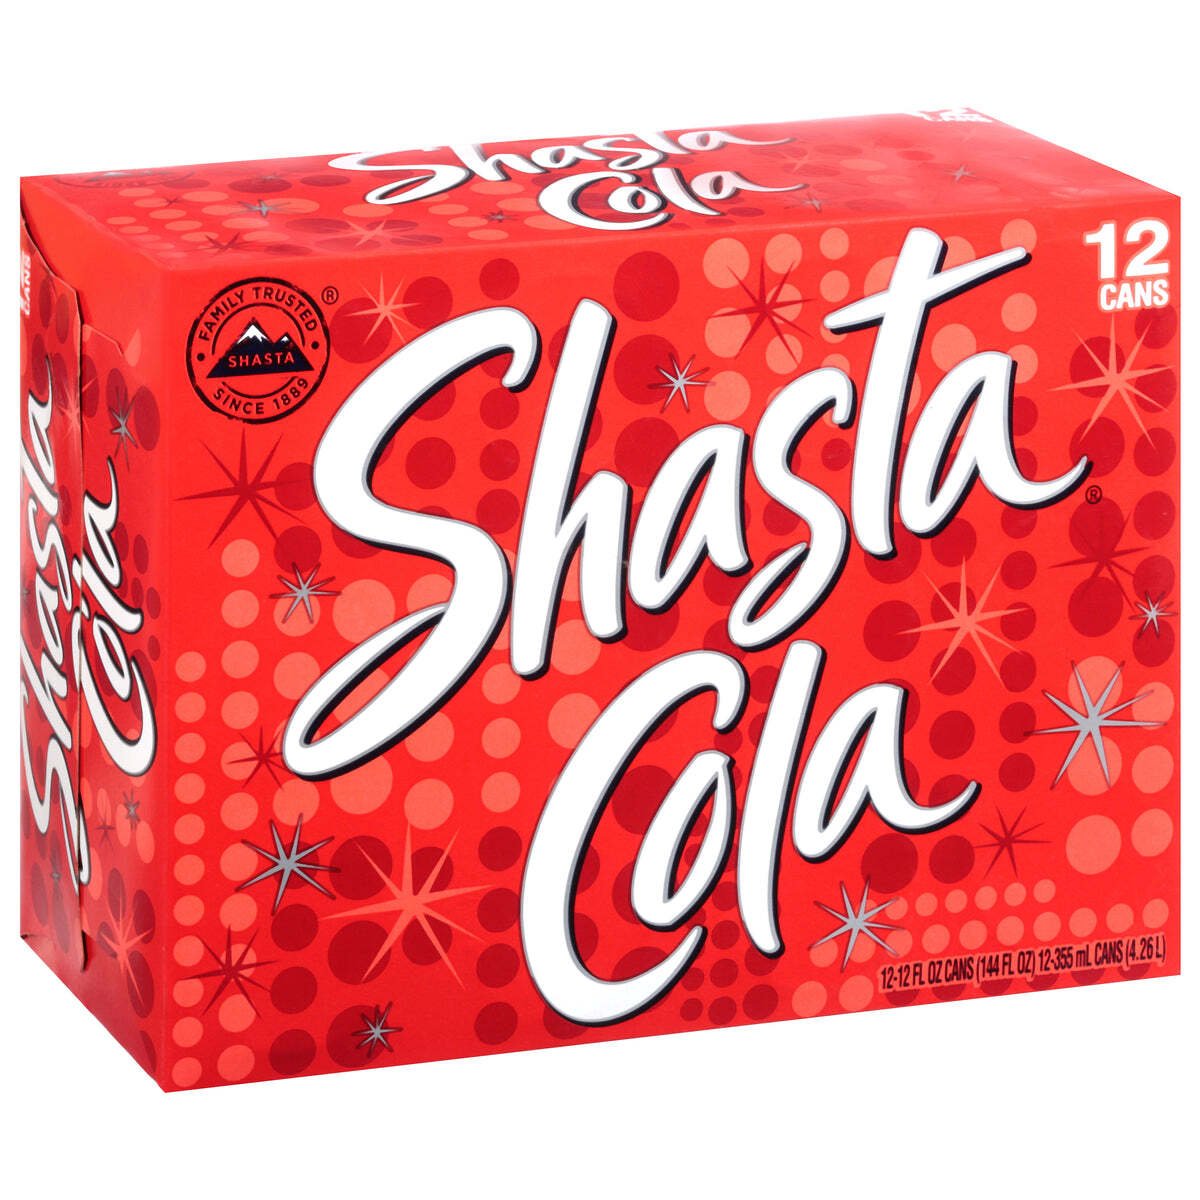 A crate of Shasta Cola